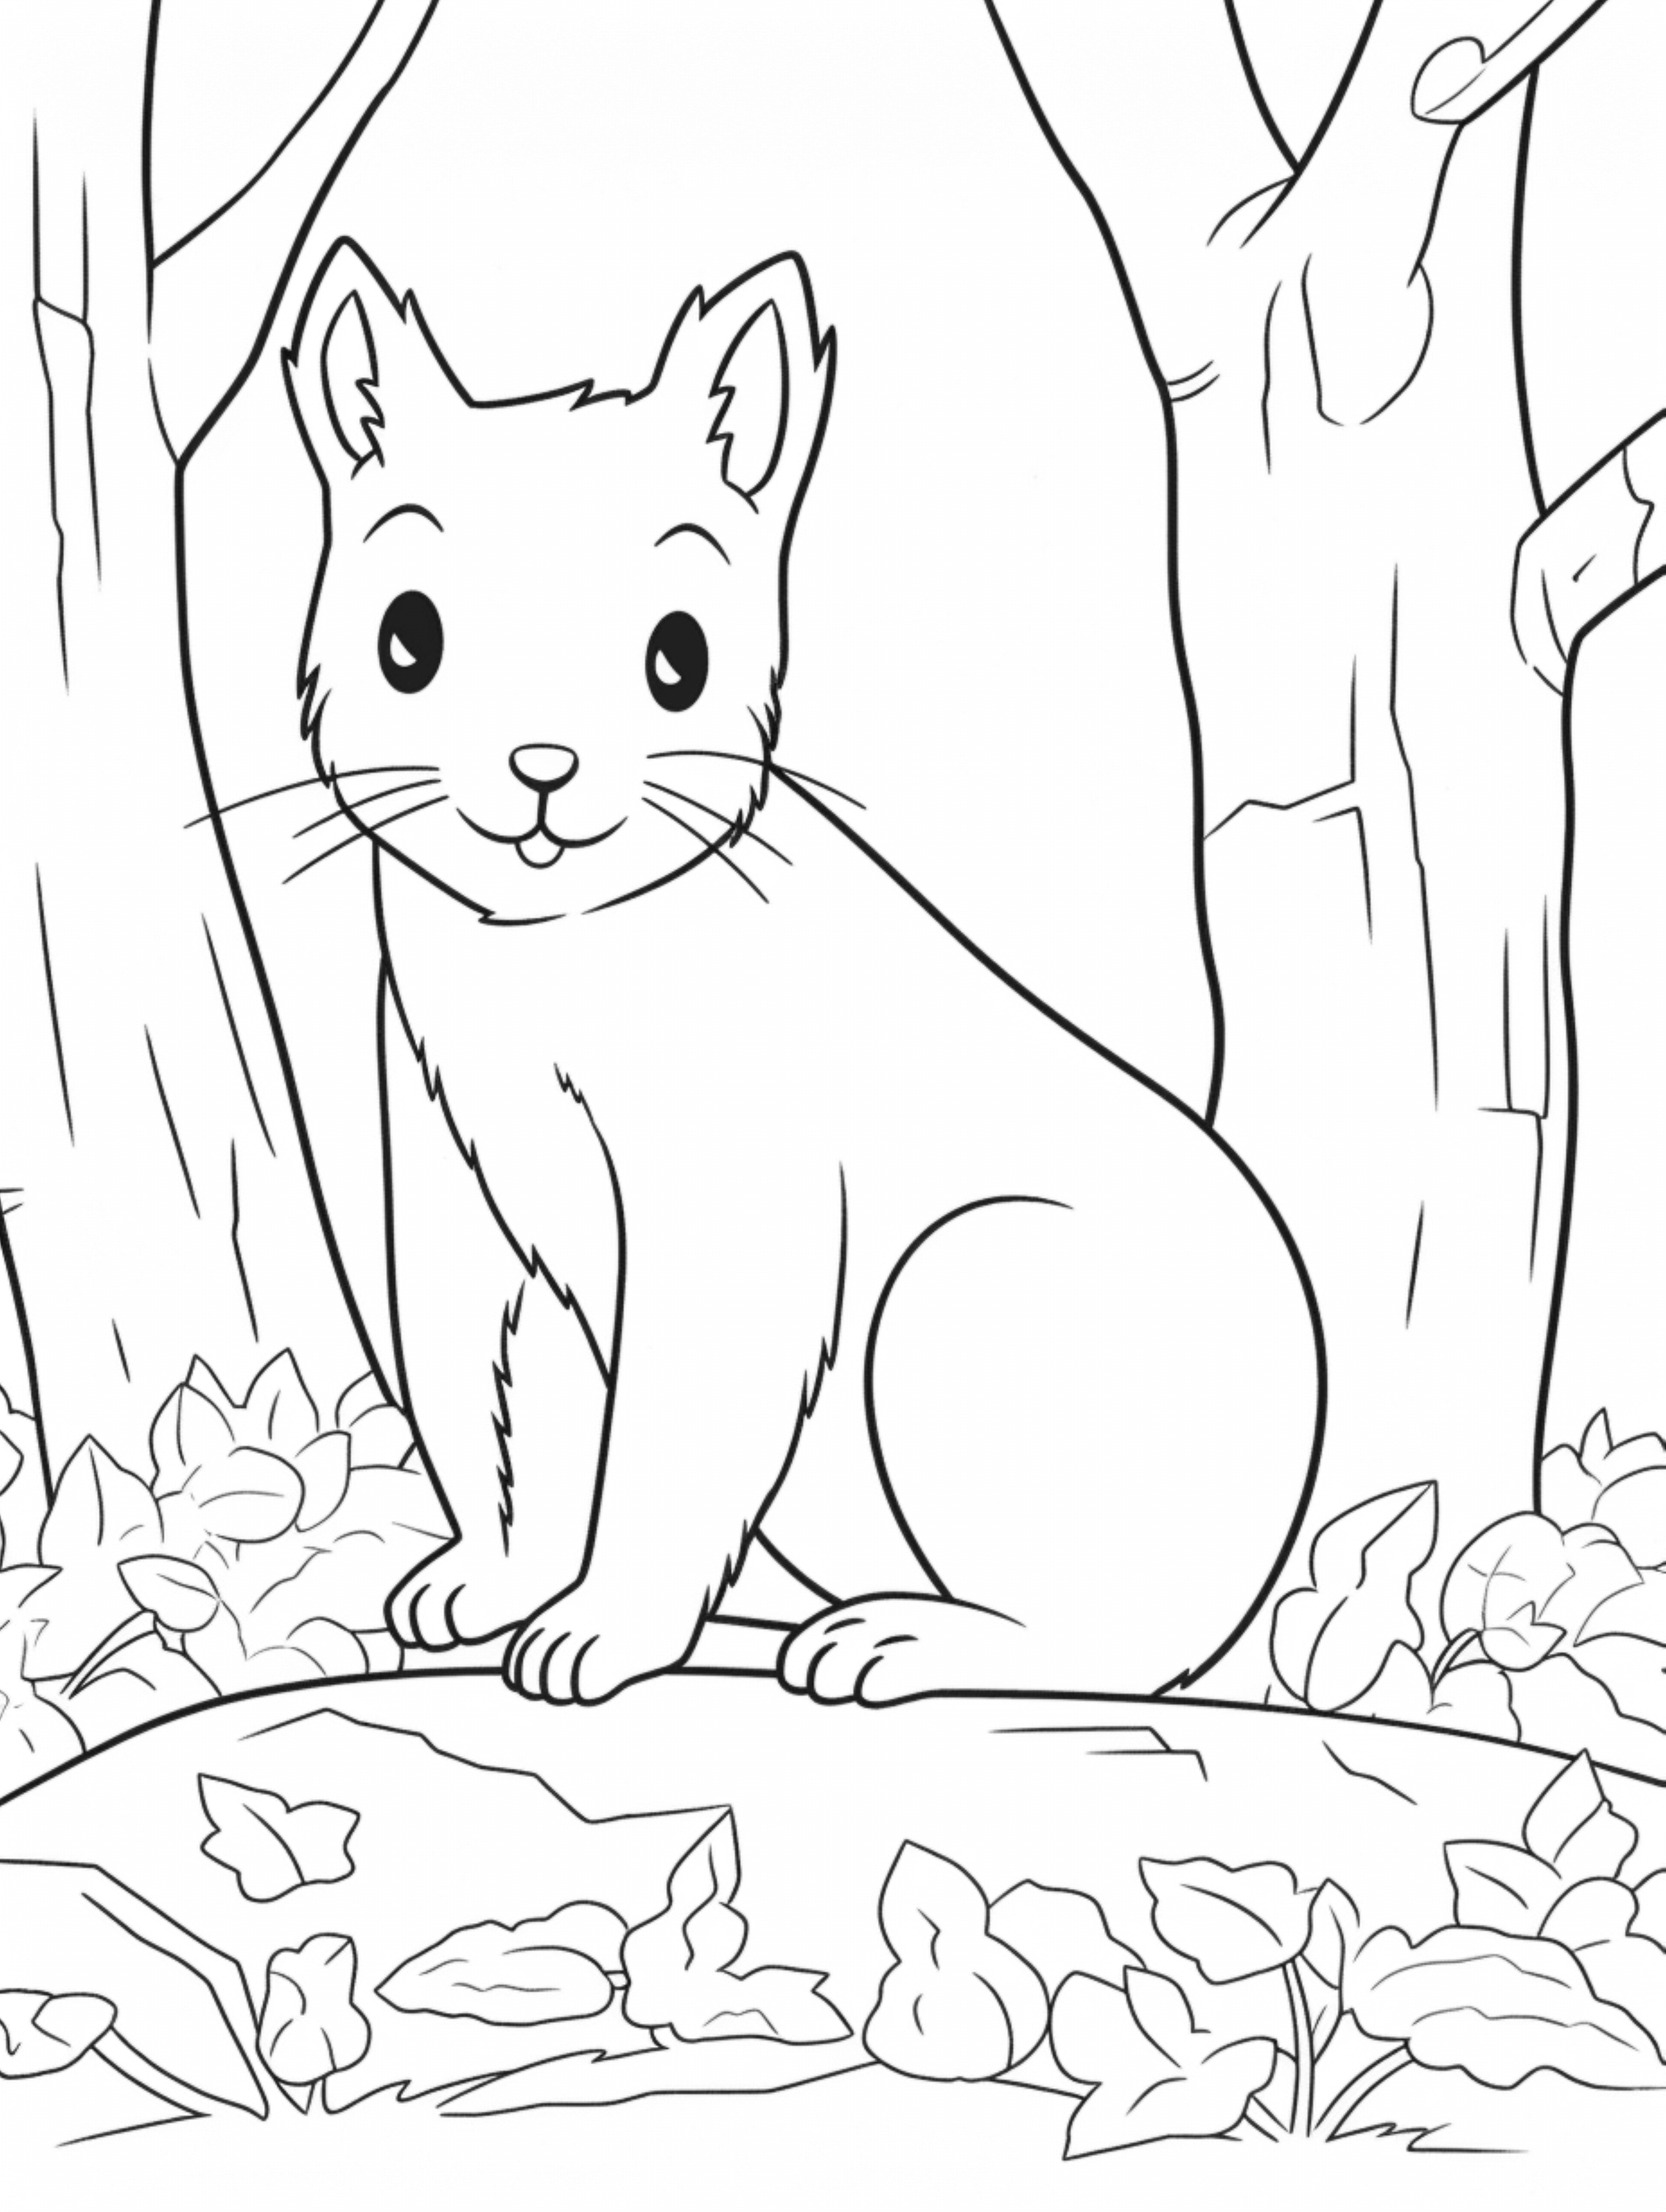 01 cute squirrel in its habitat coloring page for ki